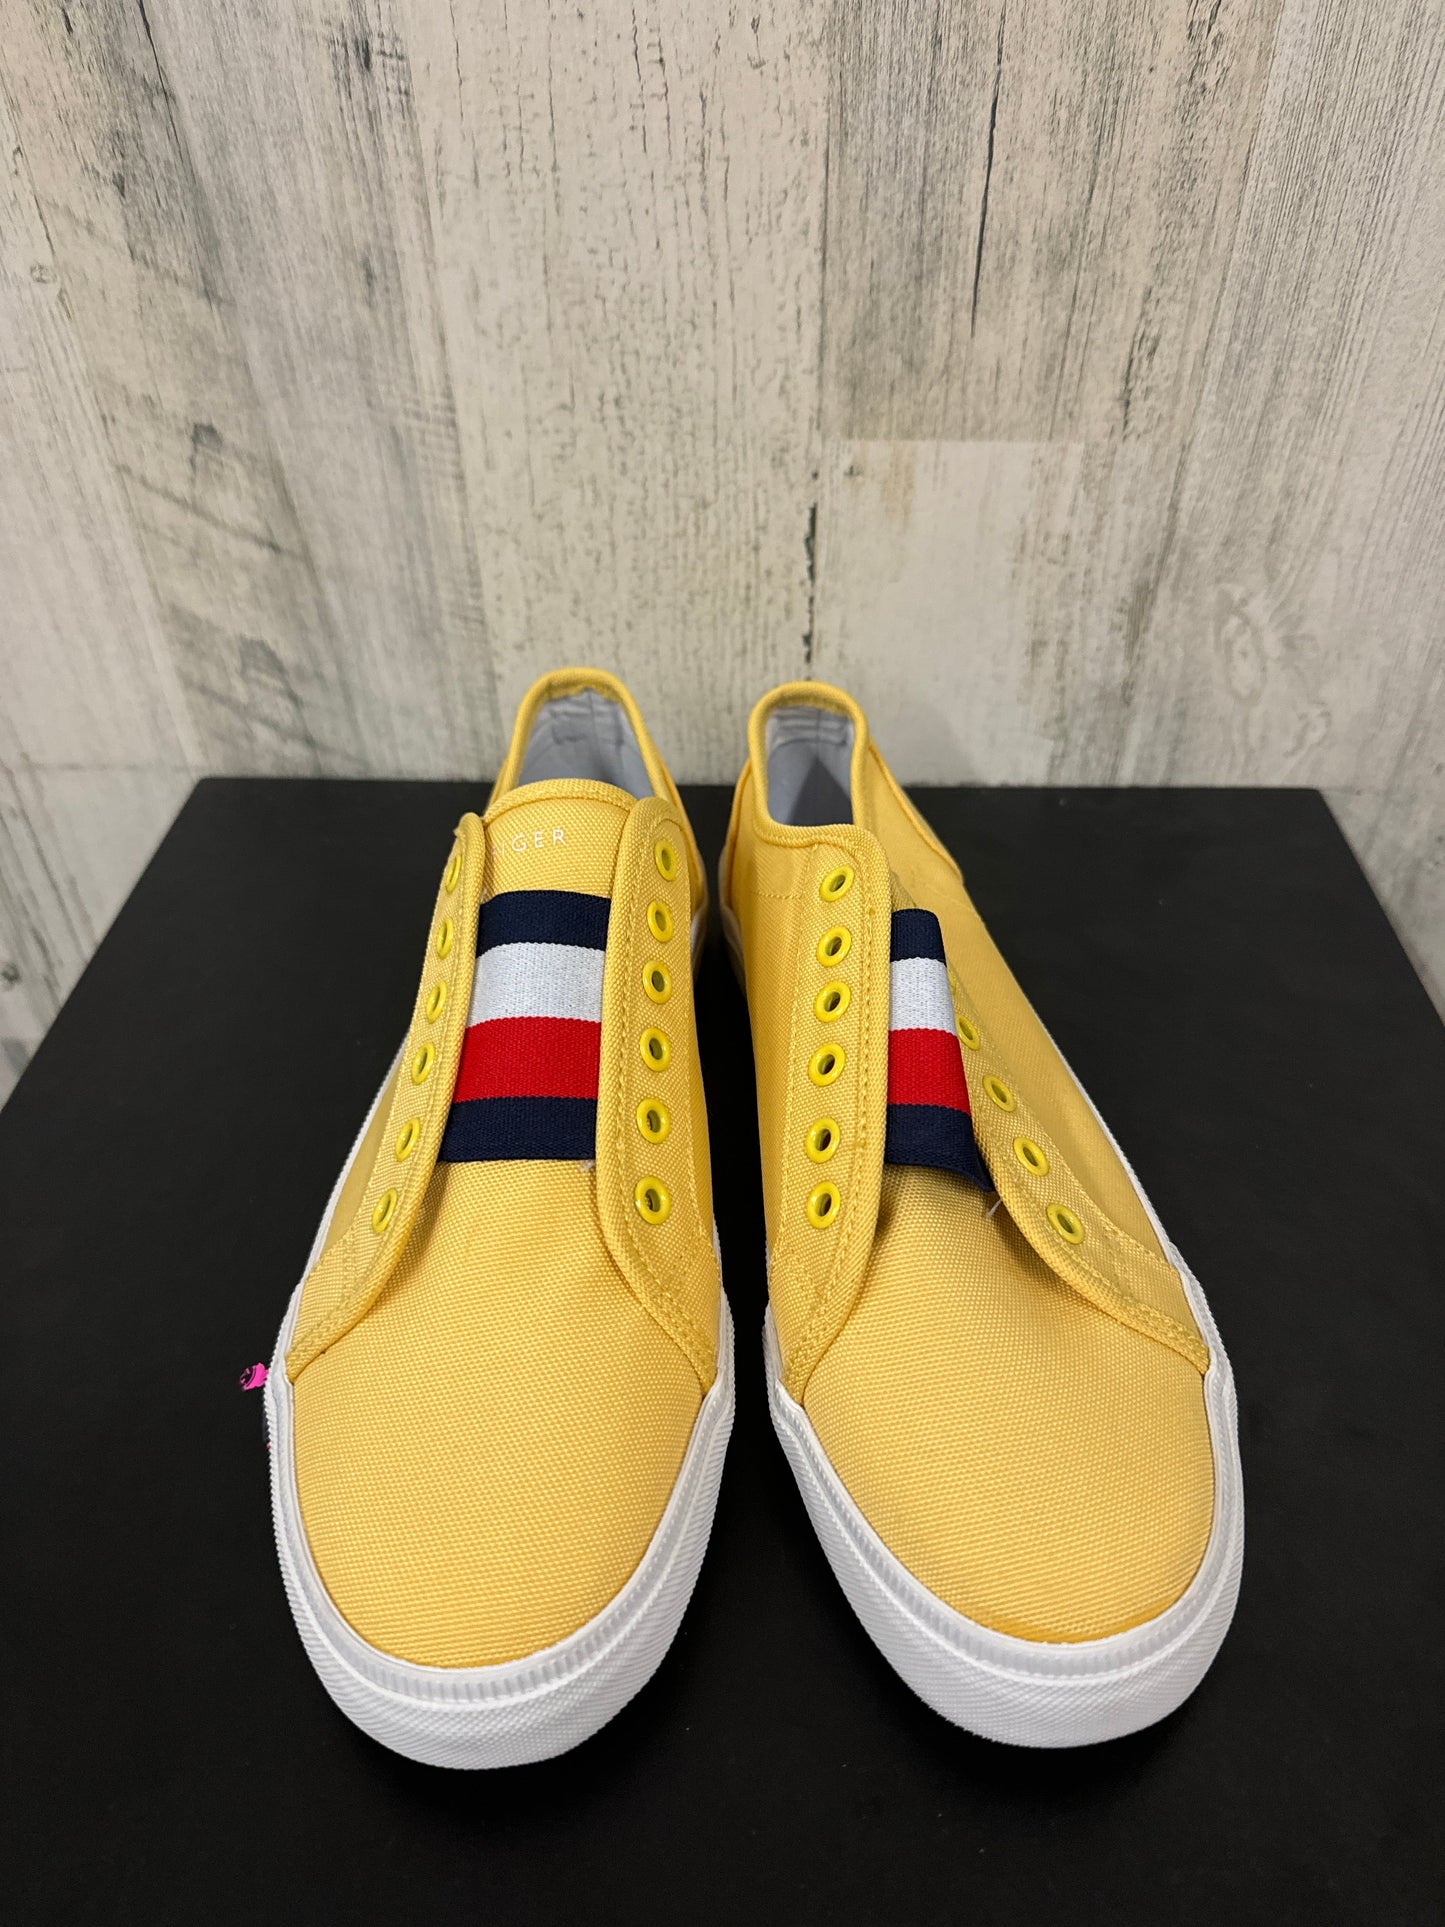 Yellow Shoes Flats Tommy Hilfiger, Size 8